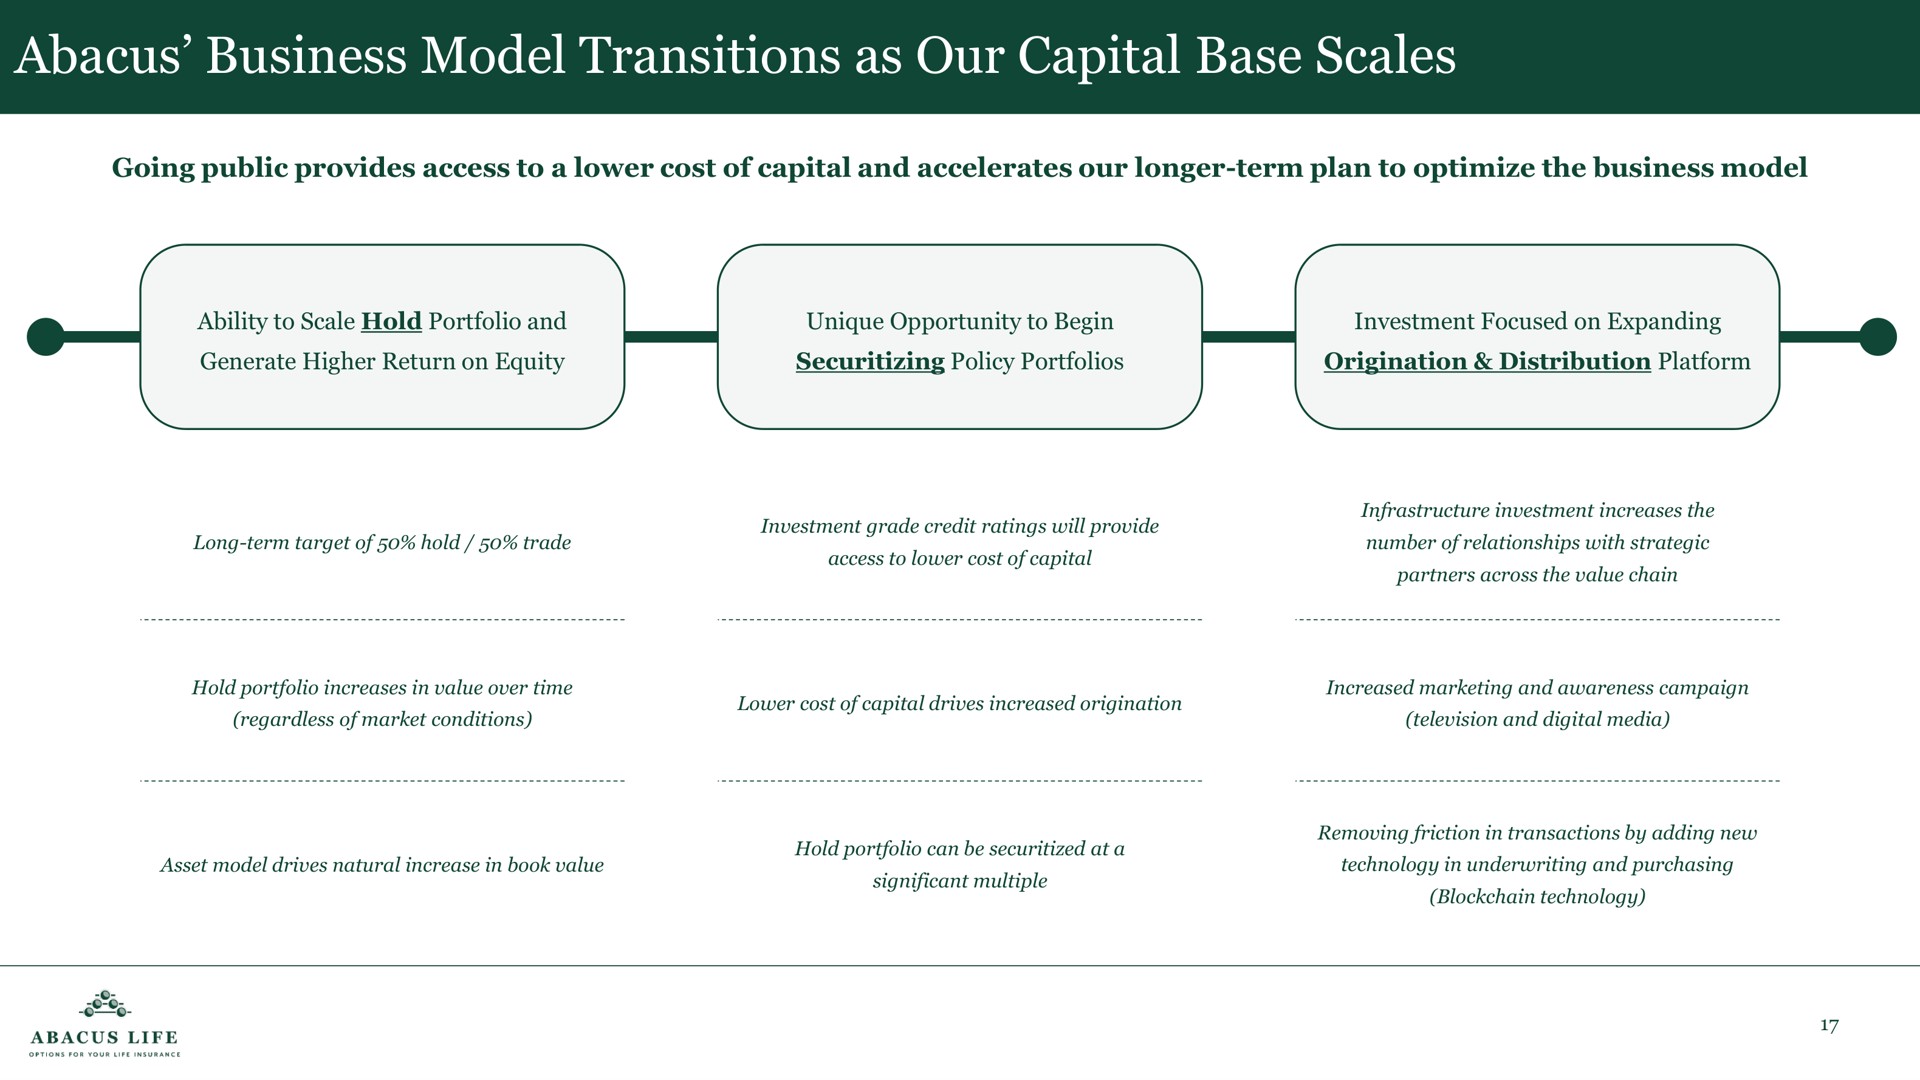 abacus business model transitions as our capital base scales | Abacus Life